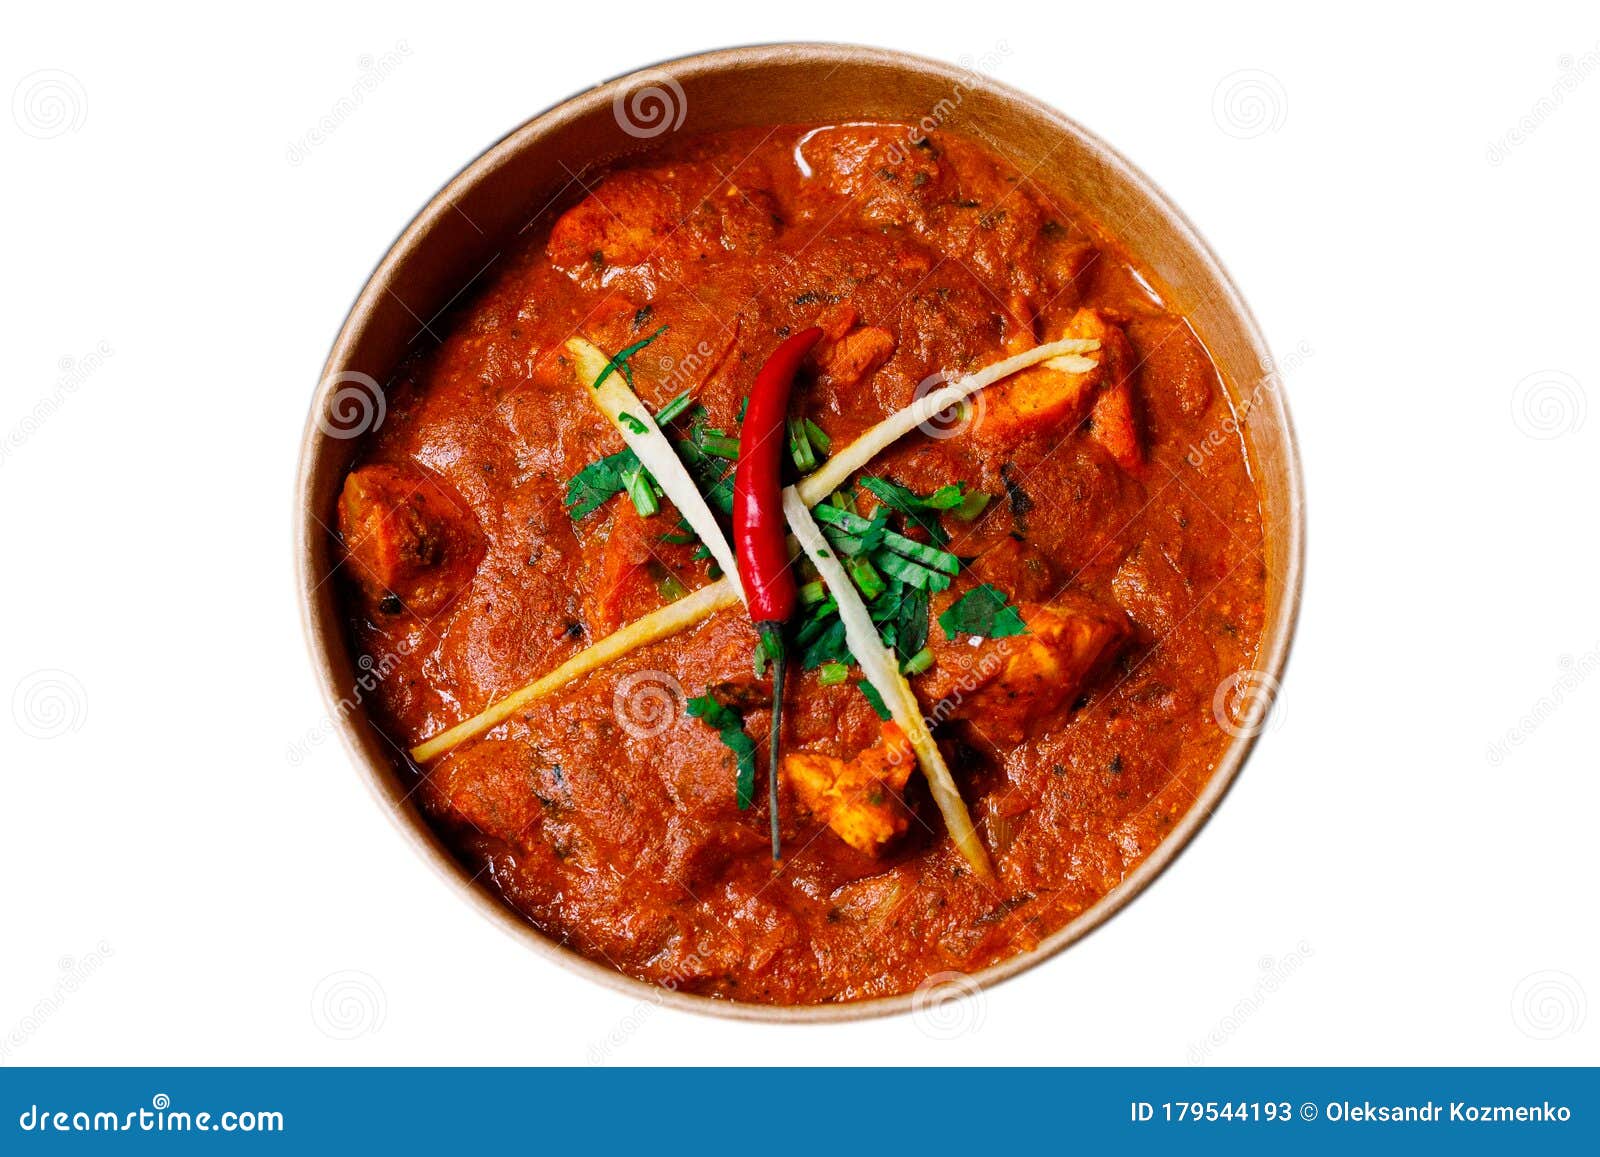 https://thumbs.dreamstime.com/z/indian-chicken-jalfrezi-curry-balti-dish-food-cuisine-hot-spicy-serving-bowl-black-chili-red-steel-dinner-meal-stainless-tikka-179544193.jpg